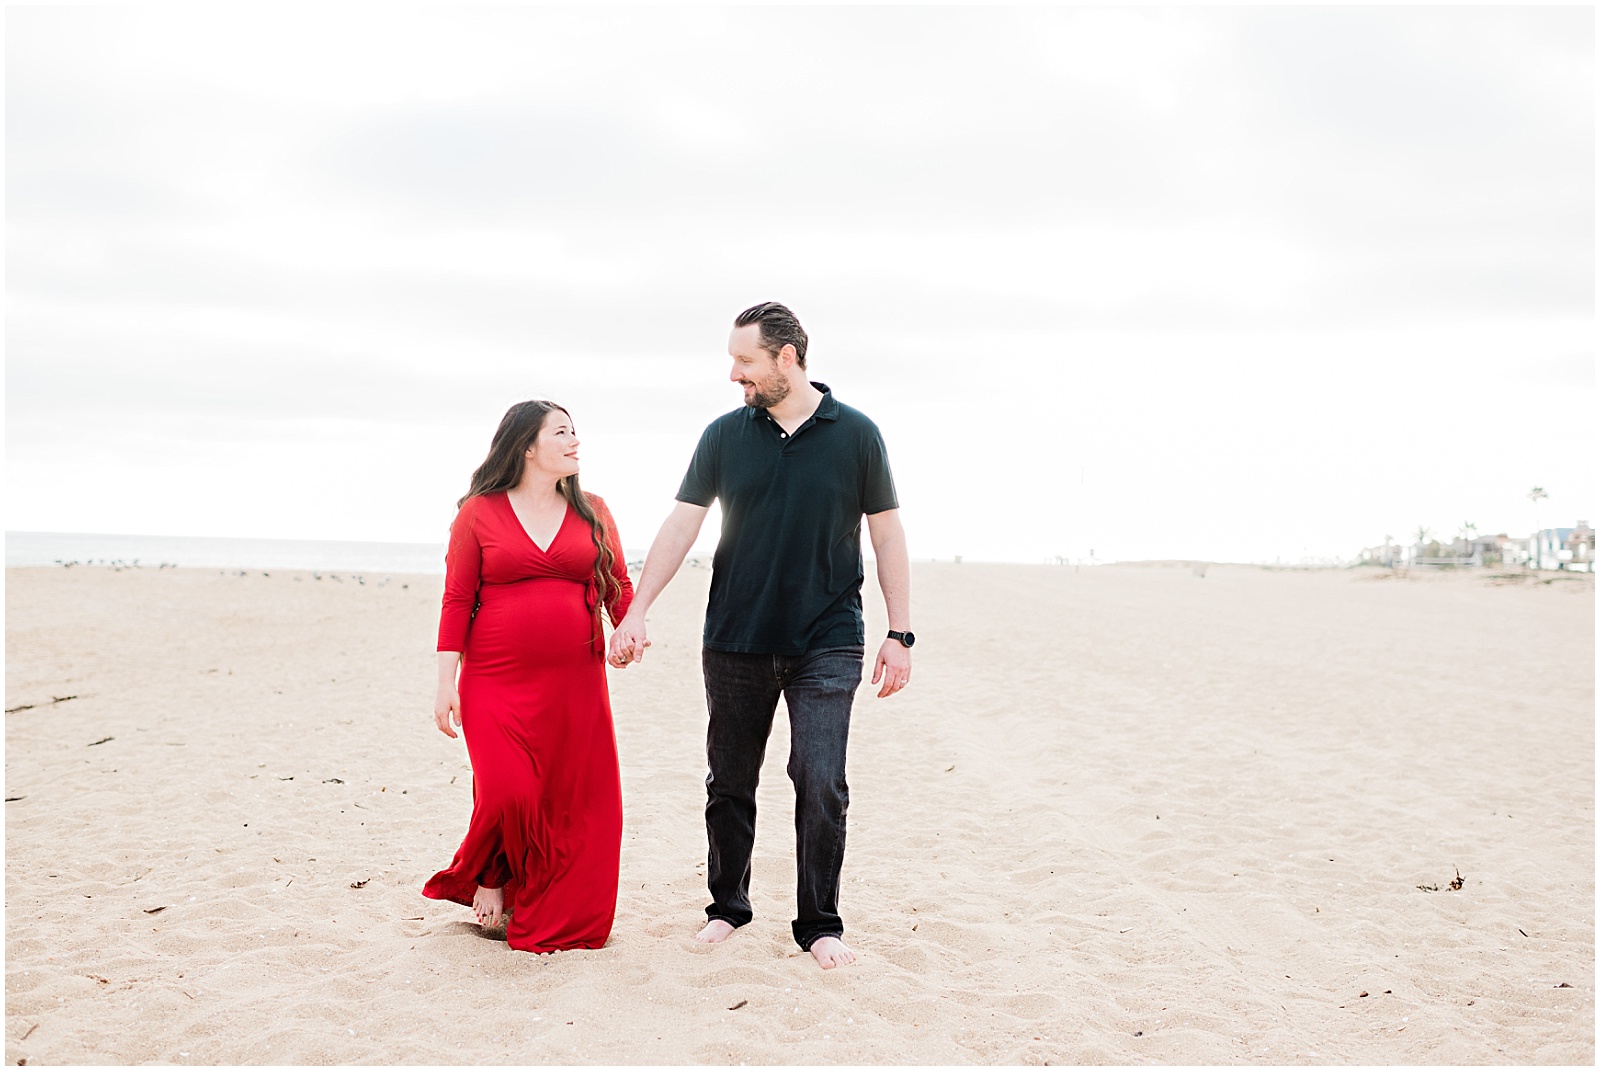 Newport Beach Maternity session. Photographed by Mollie Jane Photography. To see more, go to www.molliejanephotography.com